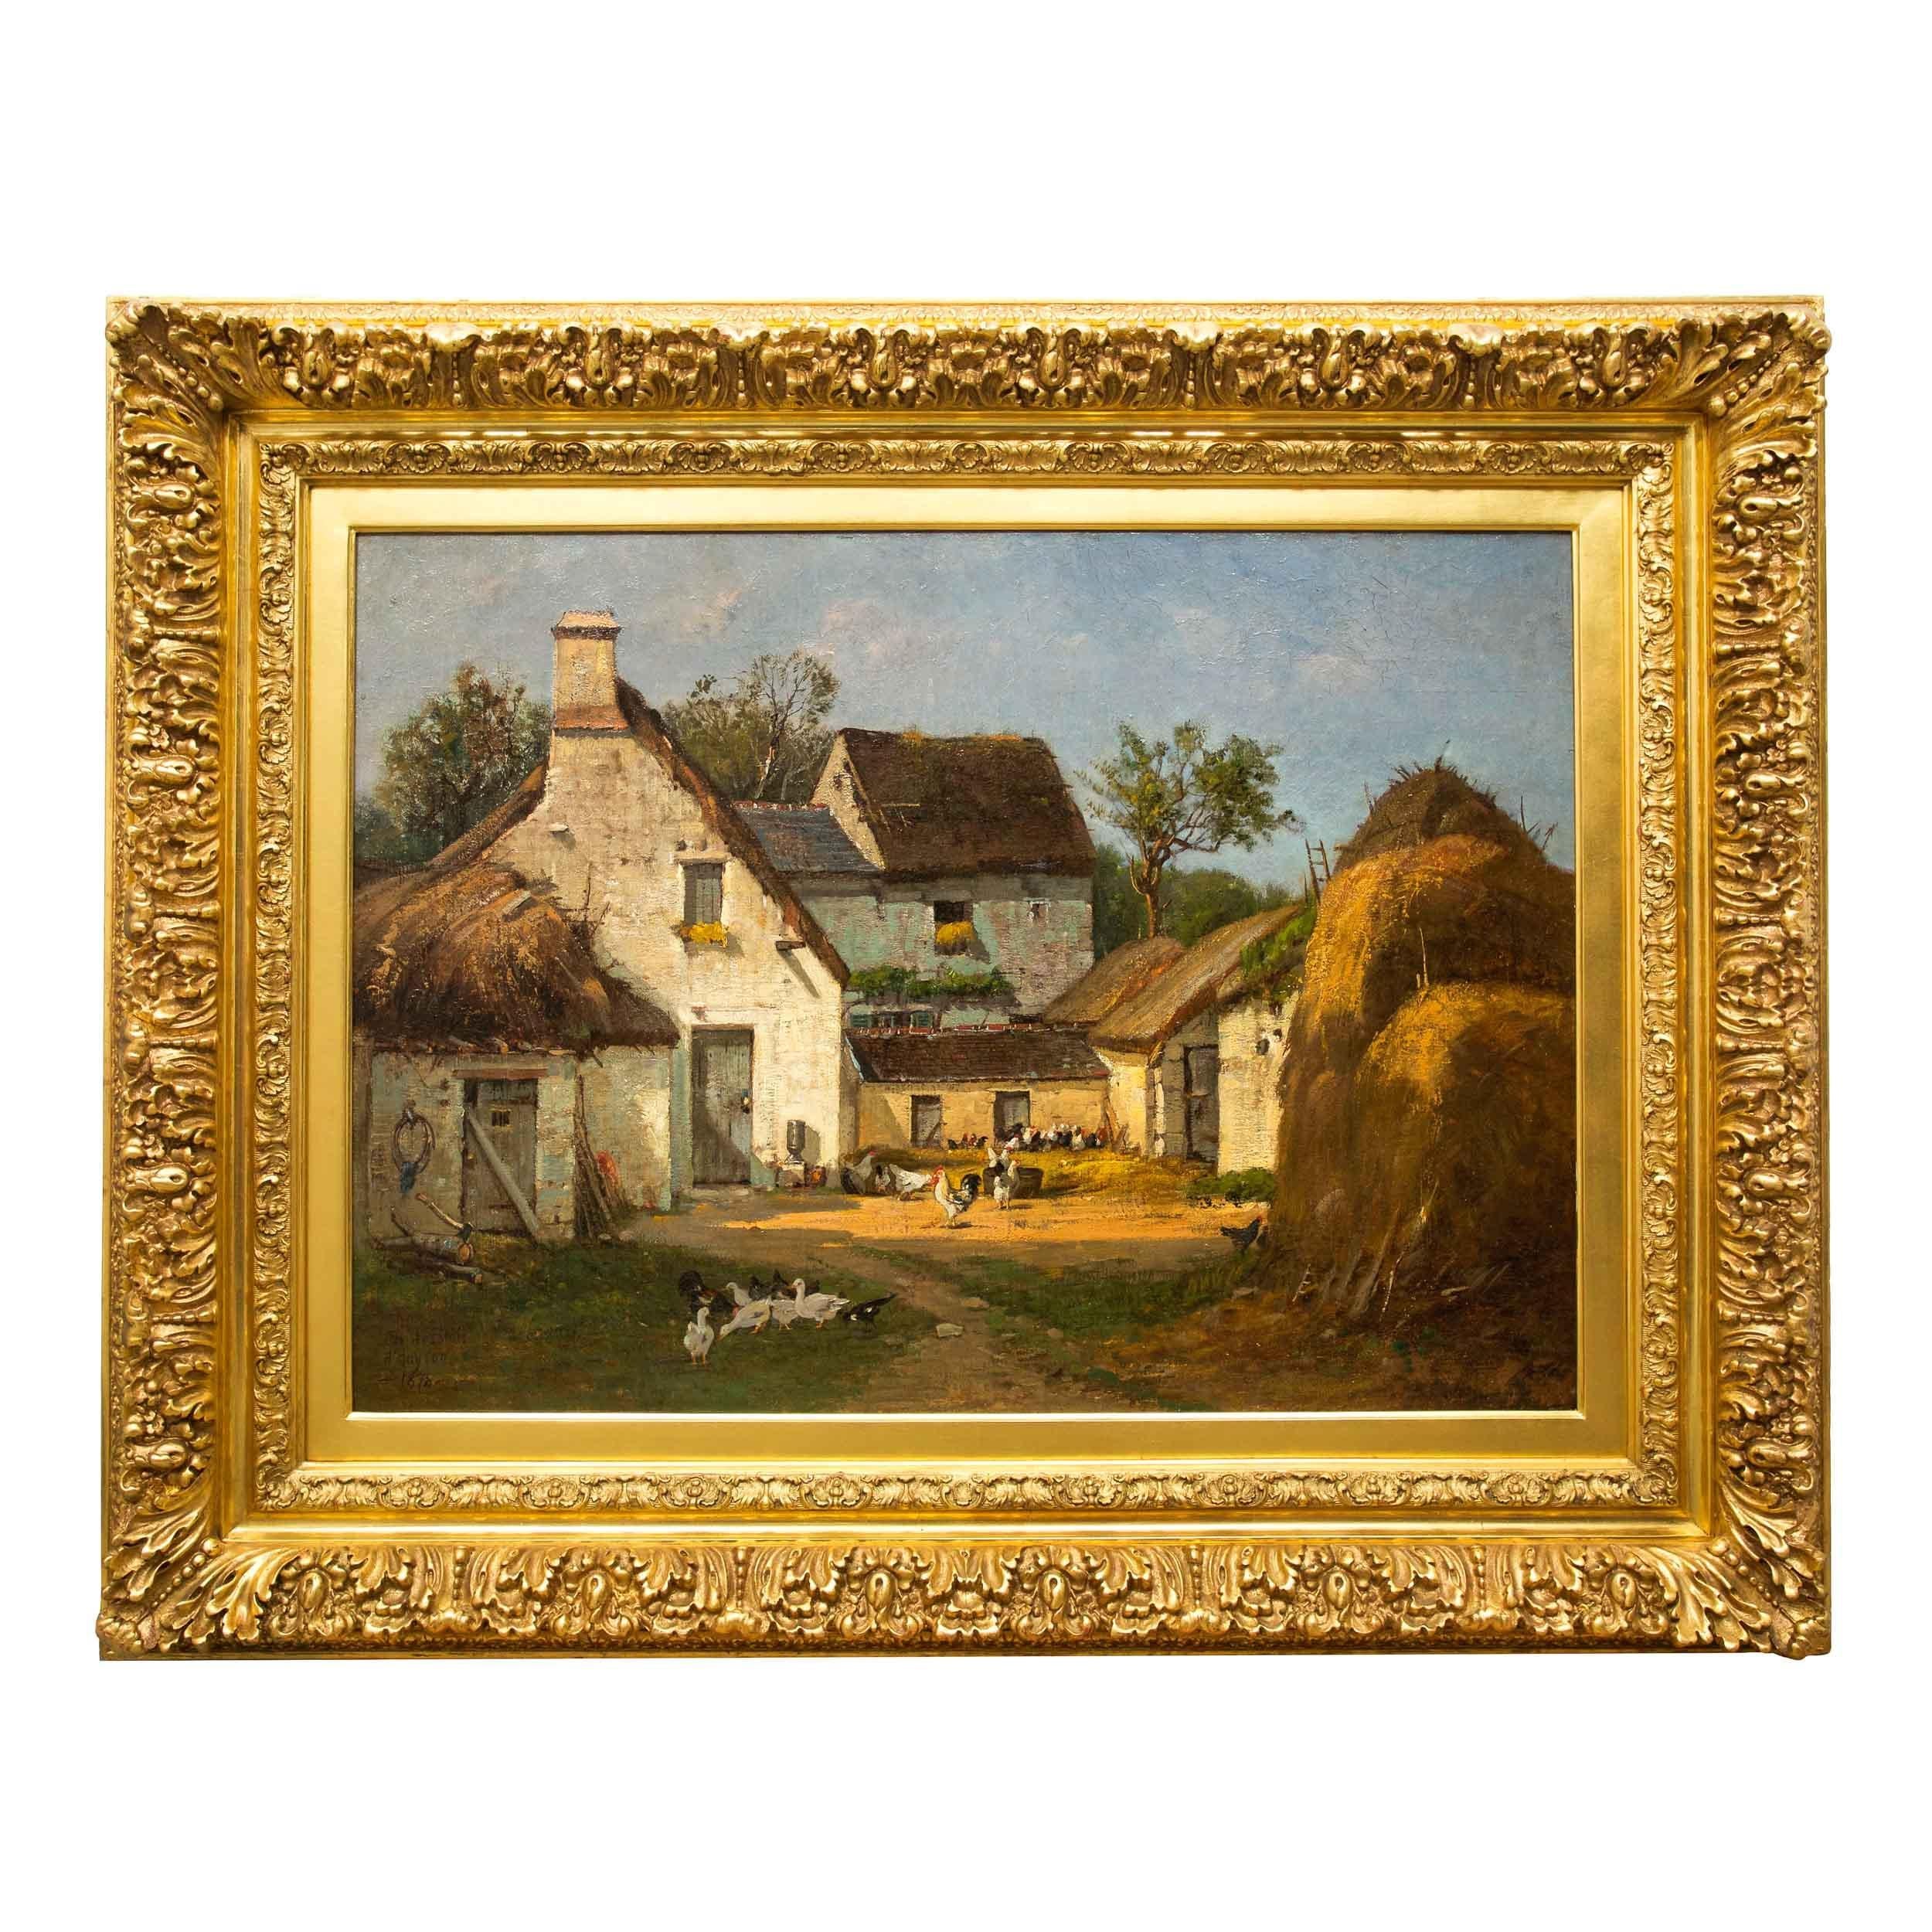 A fine and rather large original painting by François B. de Blois depicting a rural barnyard with roaming chickens beneath brilliant blue skies, the work is beautifully textured with intricately layered pigments making up each element of the